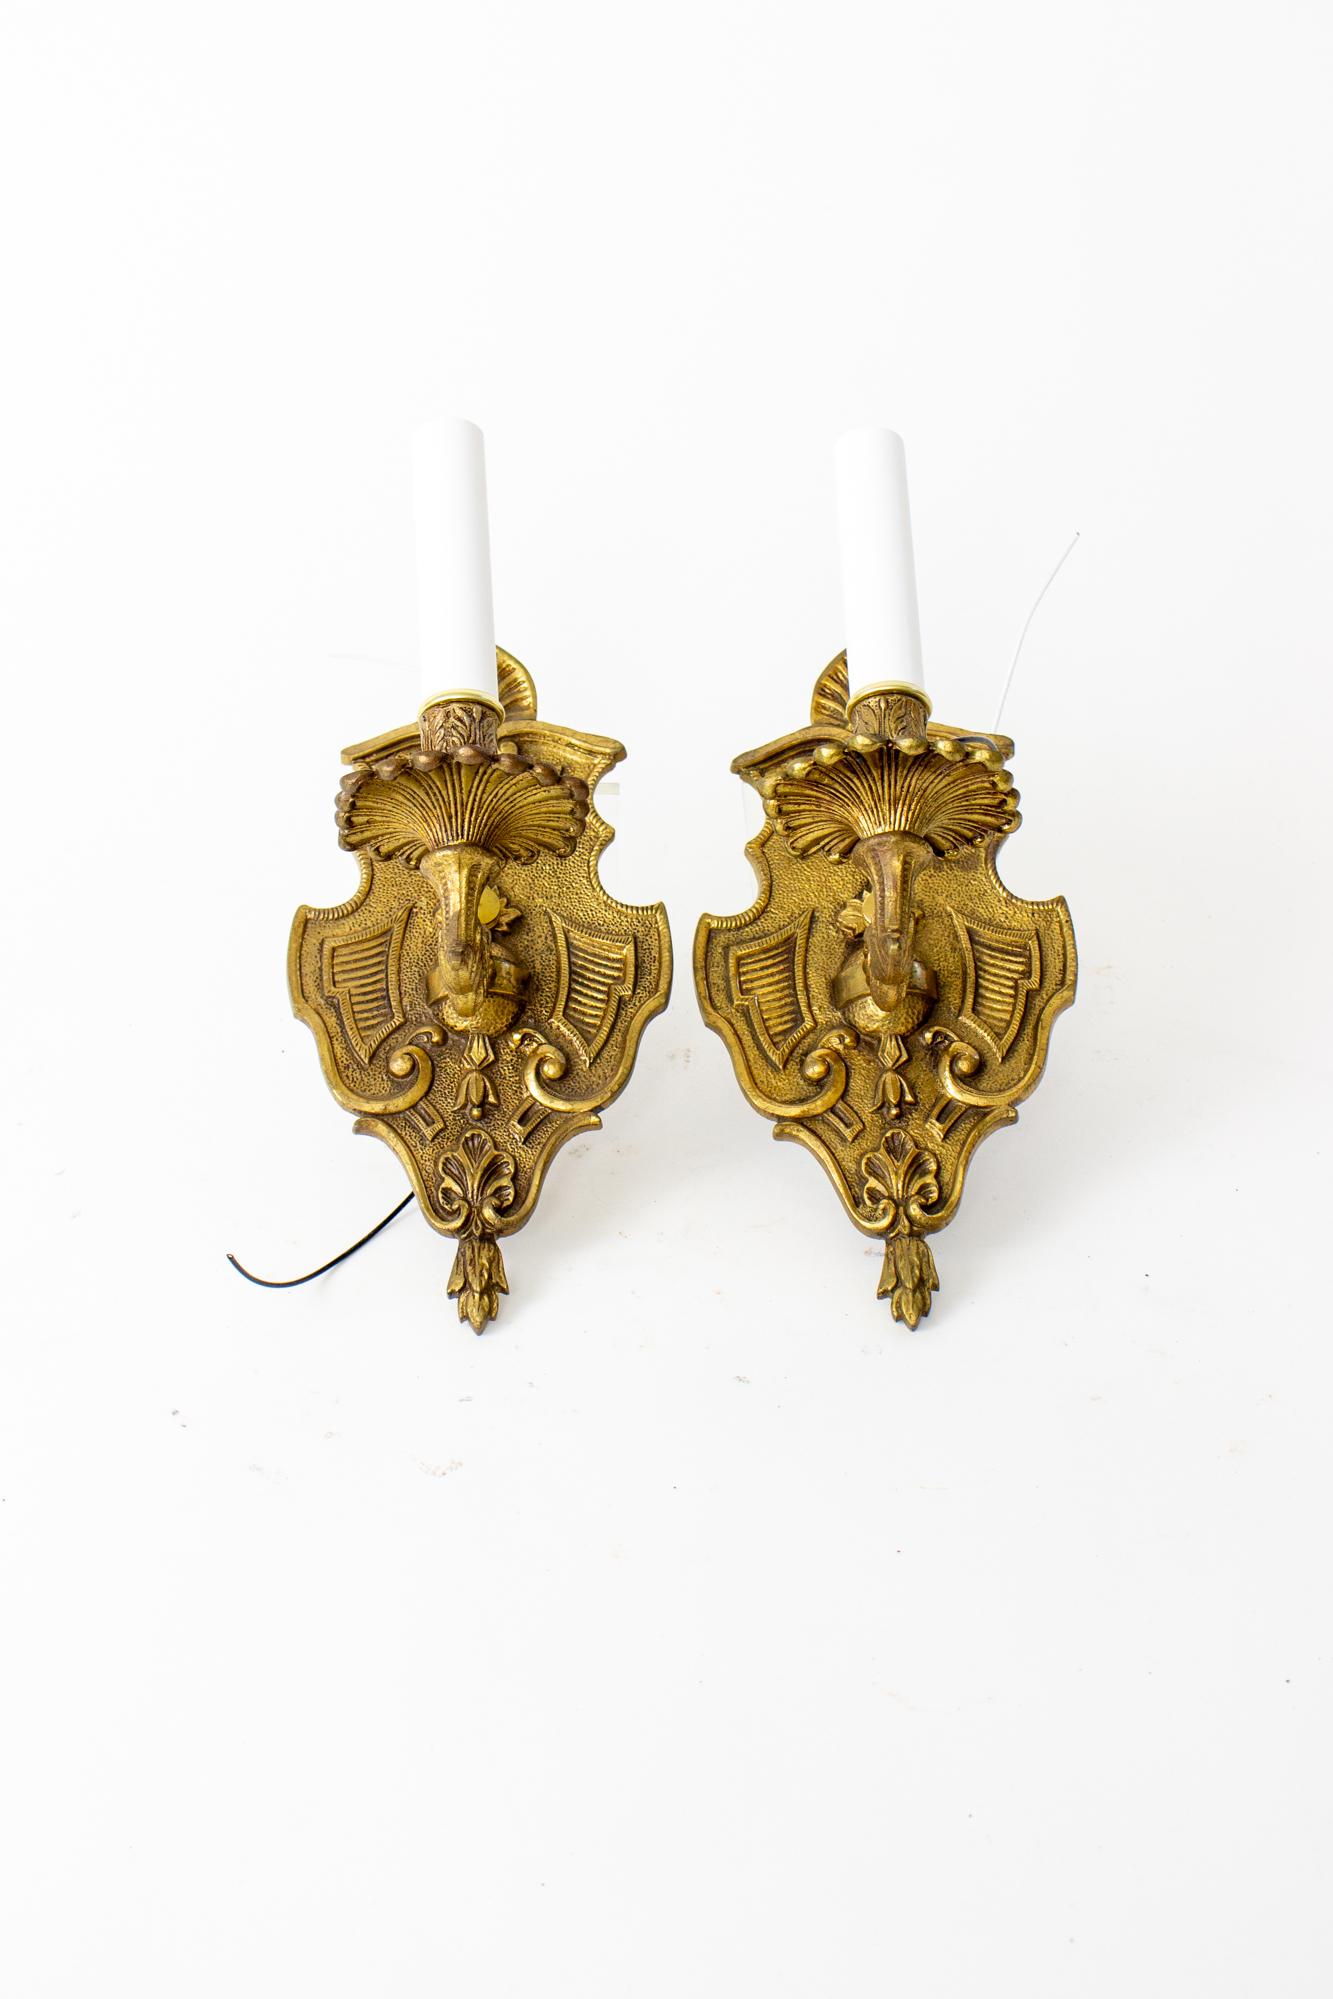 Mid 20th century Spanish cast brass sconces, a pair. Shield form backplate with a single ornate cast brass arm. Brass has a nice and even antique patina. Rewired with new candlecovers, ready for installation. Each sconce takes a single candelabra